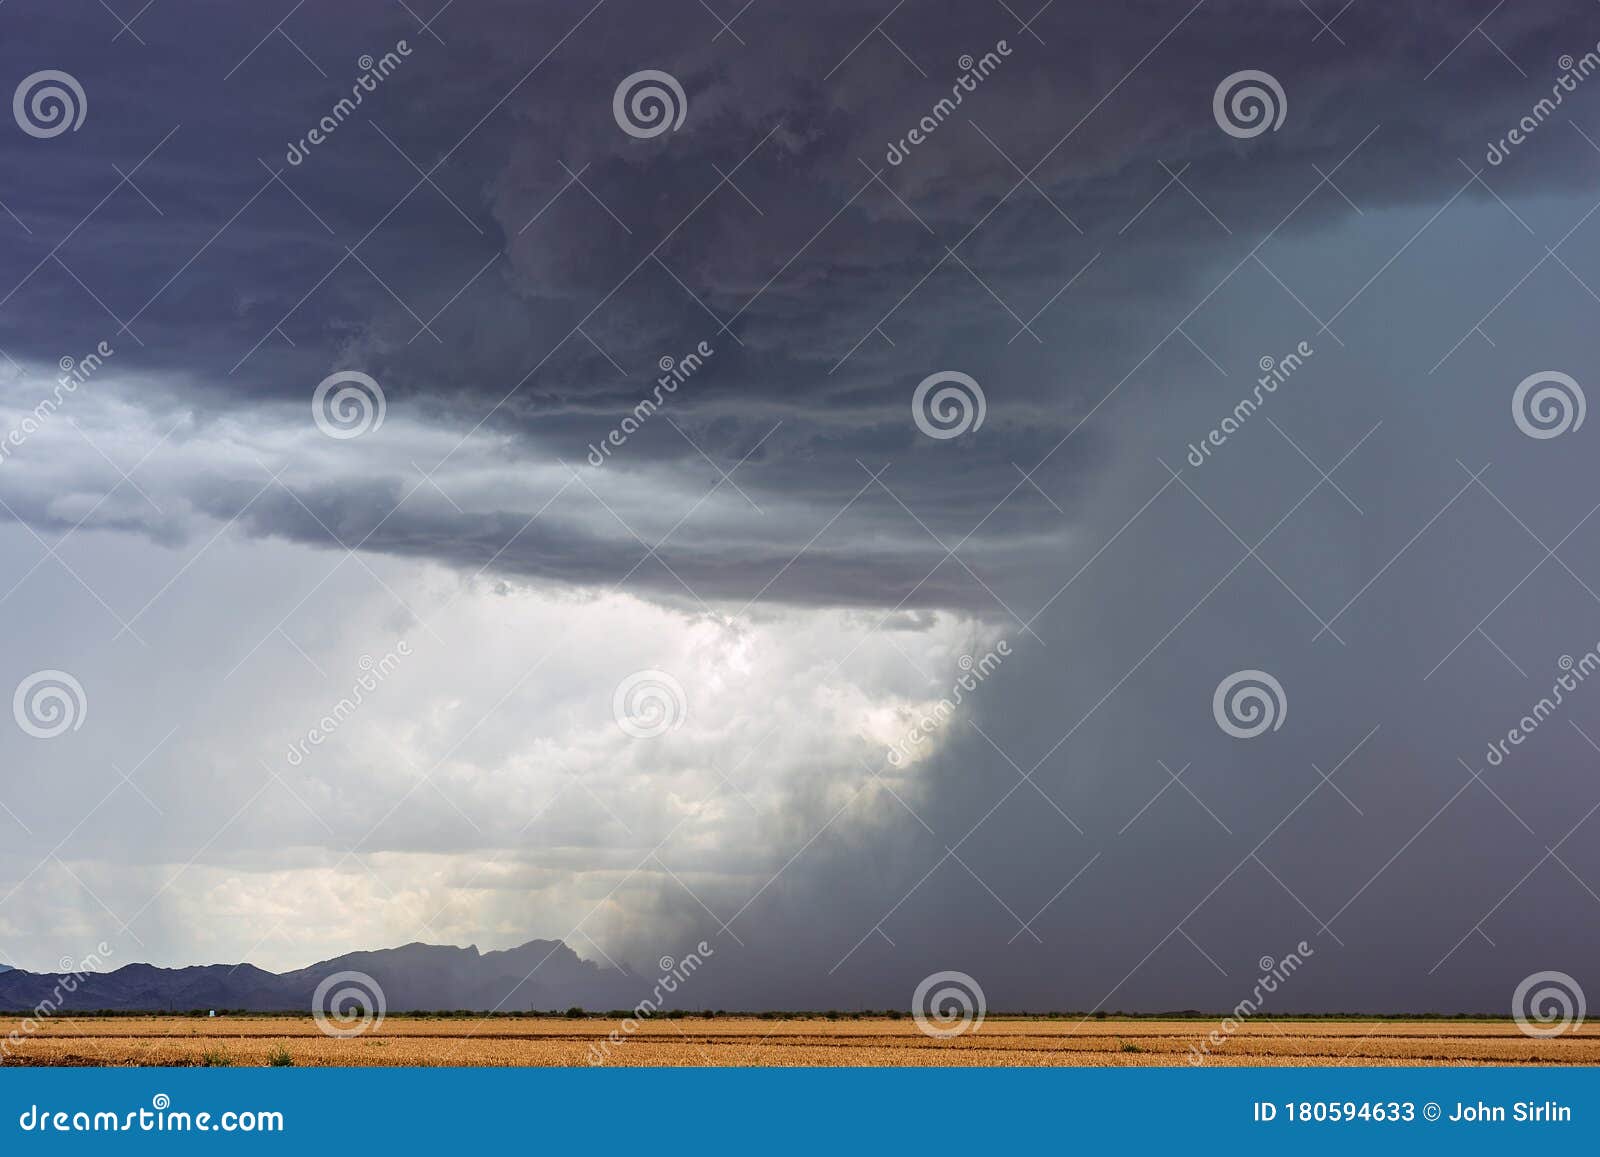 microburst and heavy rain downpour from a thunderstorm